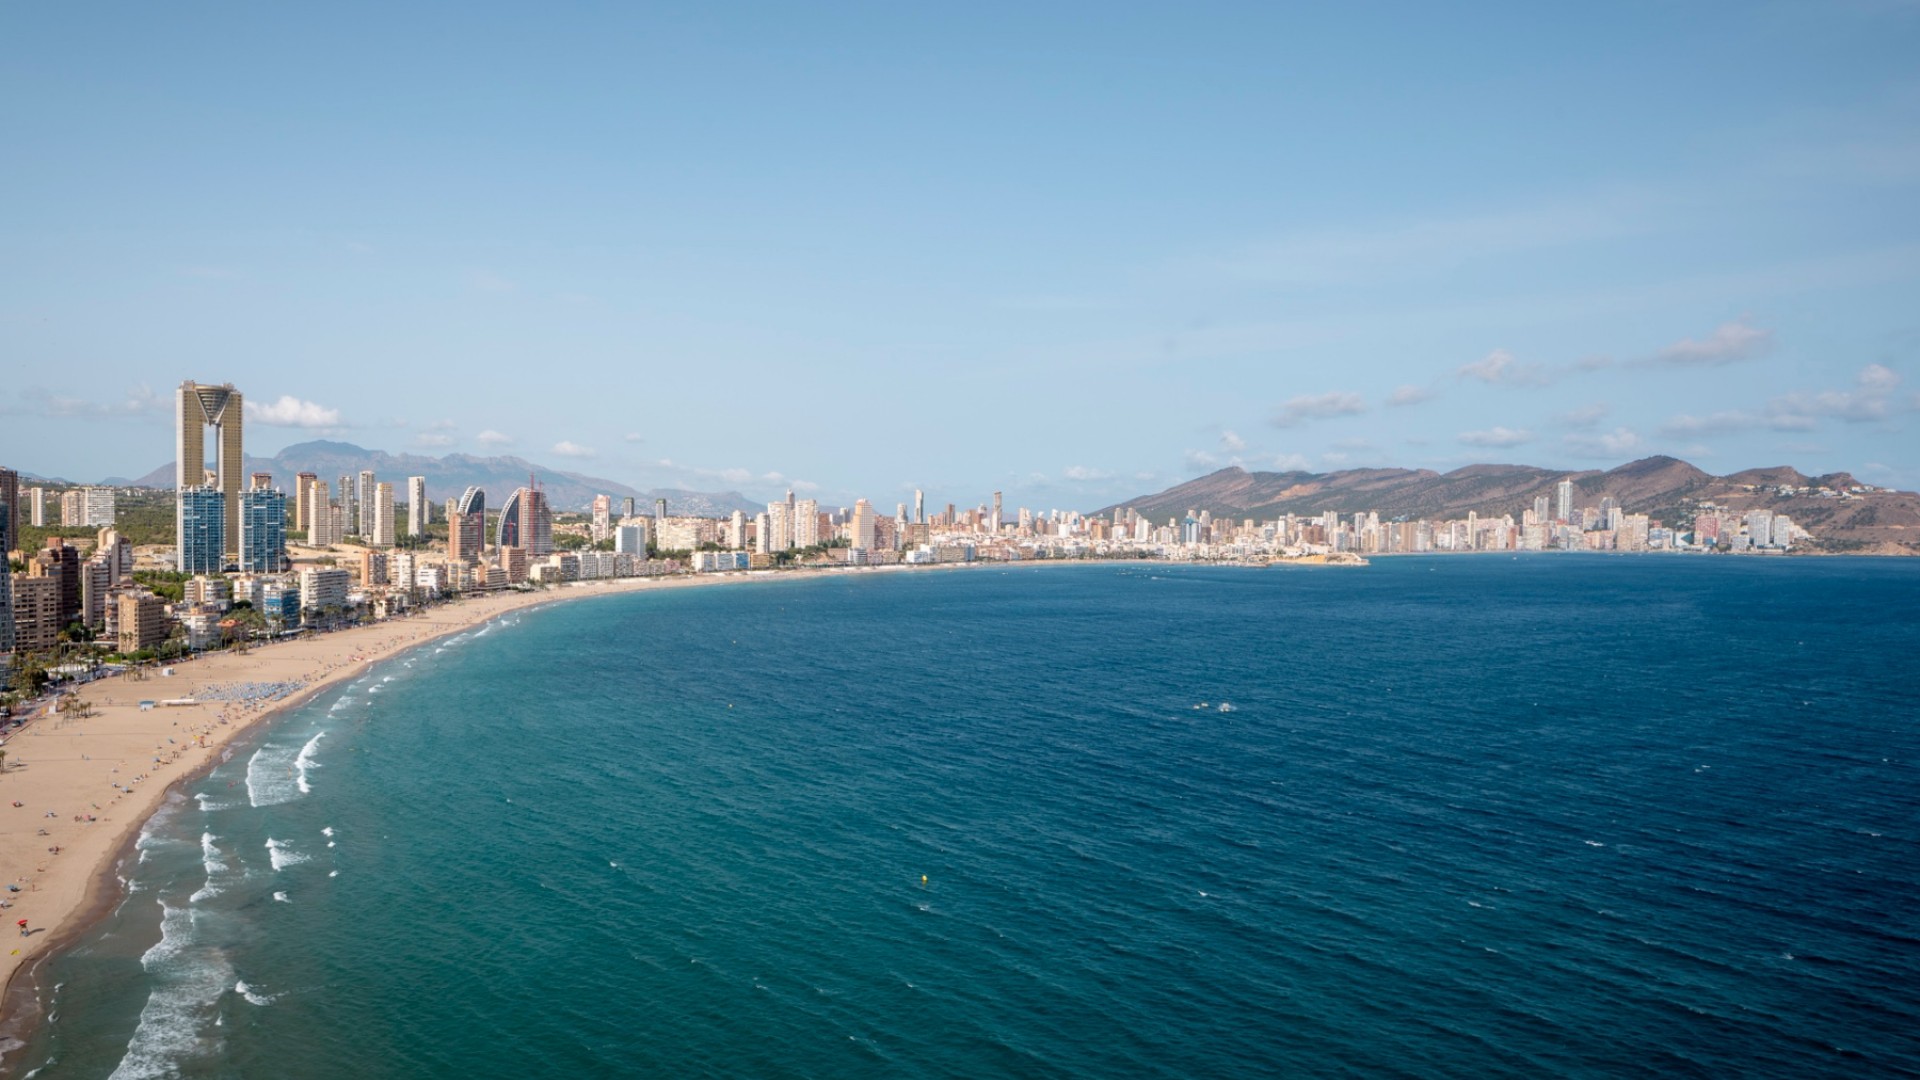 256 apartments-Intempo Residential Sky(view) Resort in Benidorm, Alicante province, near the blue flag beaches of Playa de Poniente